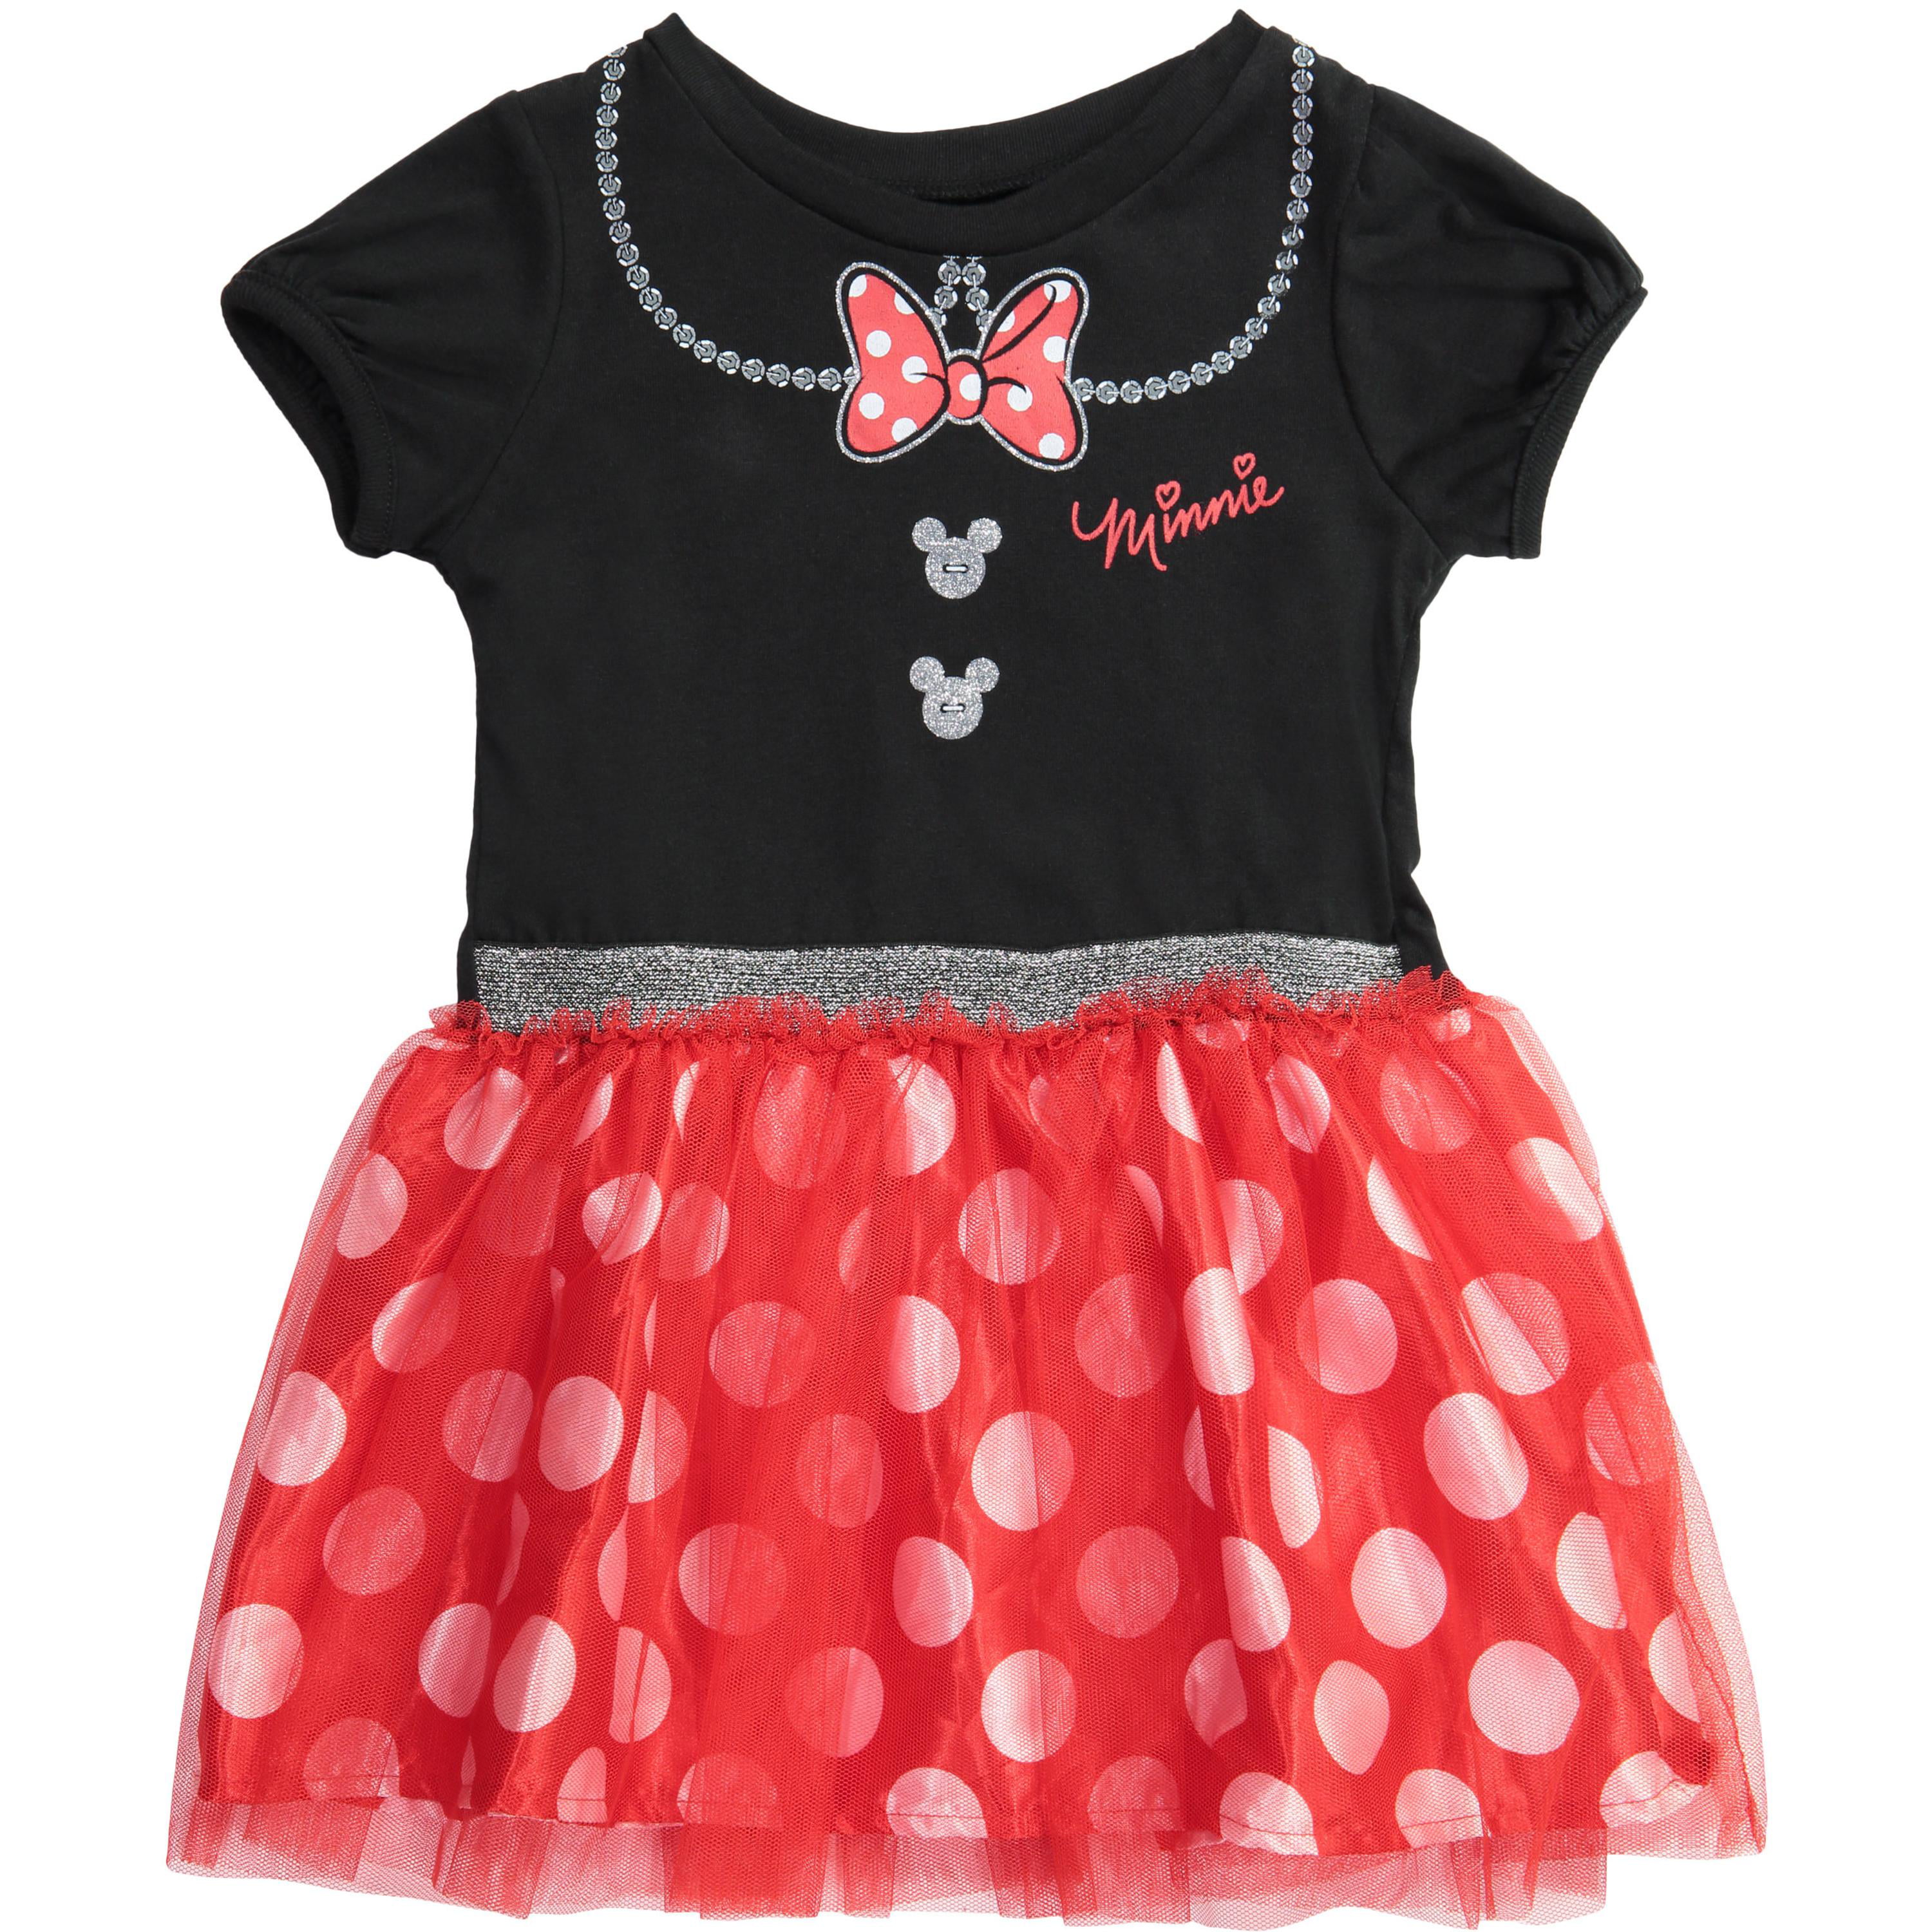 2PC MINNIE MOUSE GIRLS FANCY DRESS UP COSTUME WITH MATCHING HEADBAND Size LARGE 